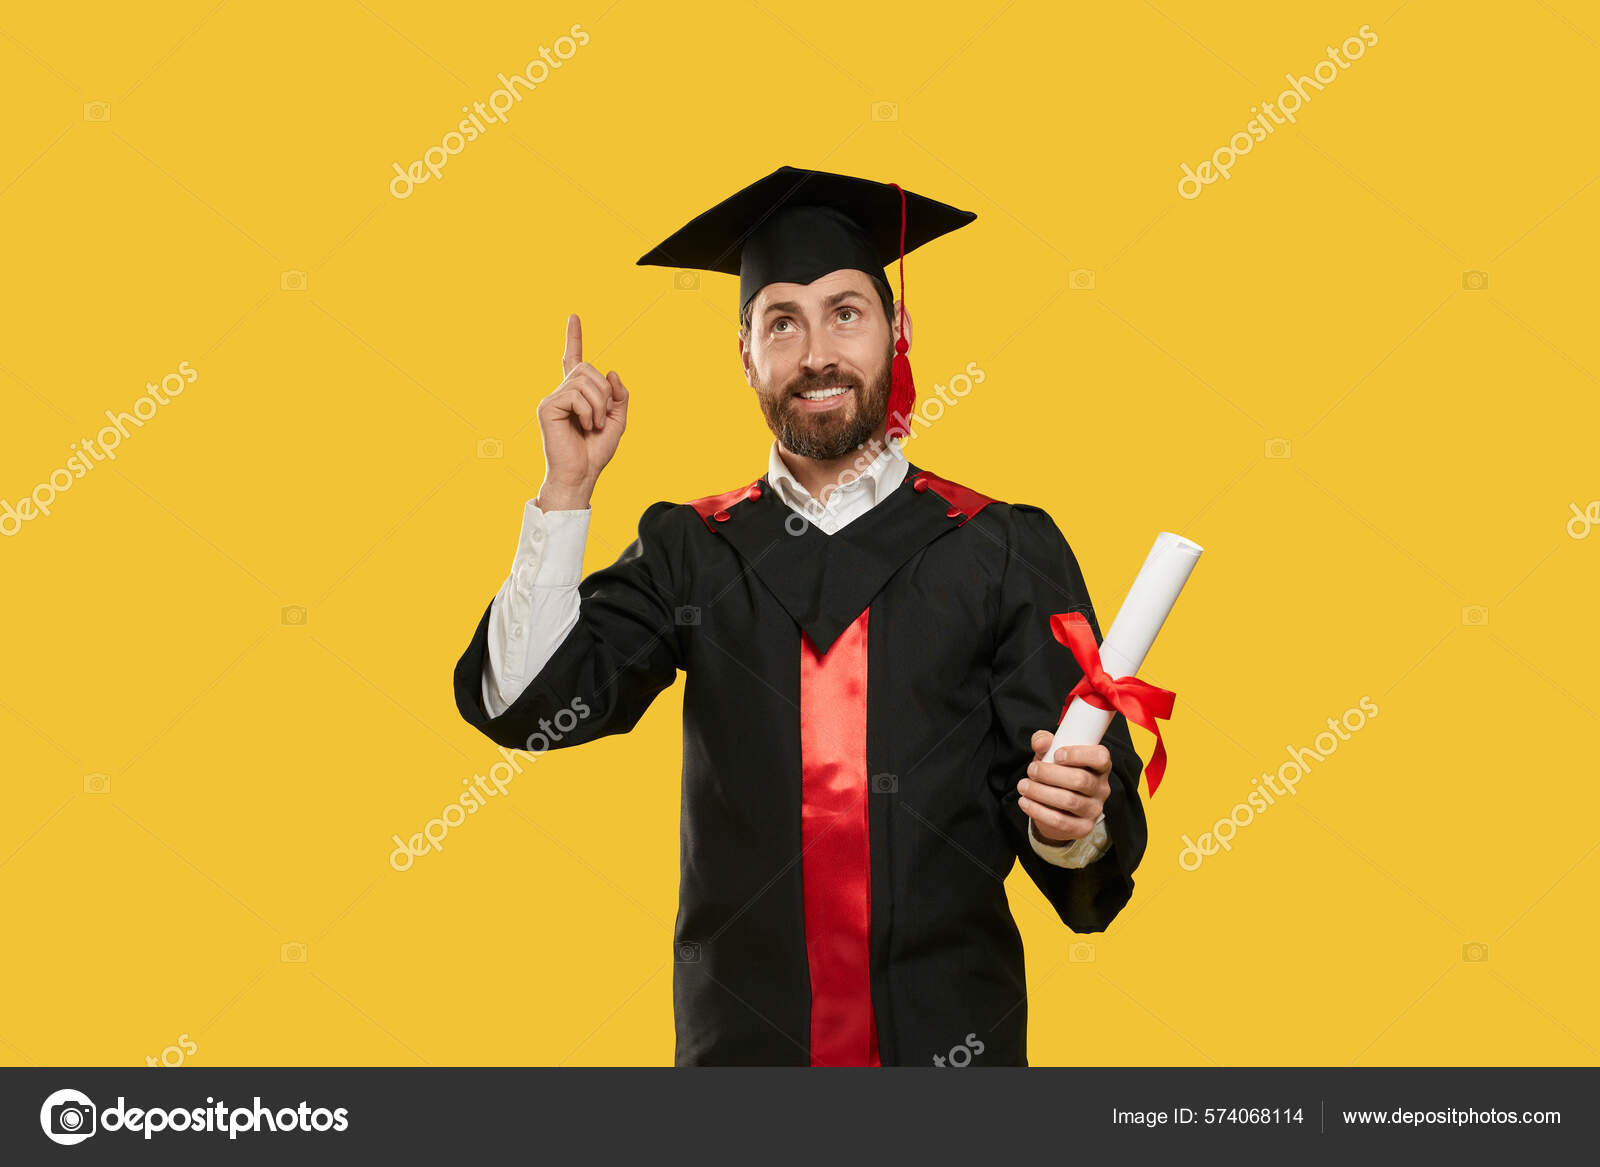 A Graduate Wearing a Mortarboard and a Graduation Gown · Free Stock Photo